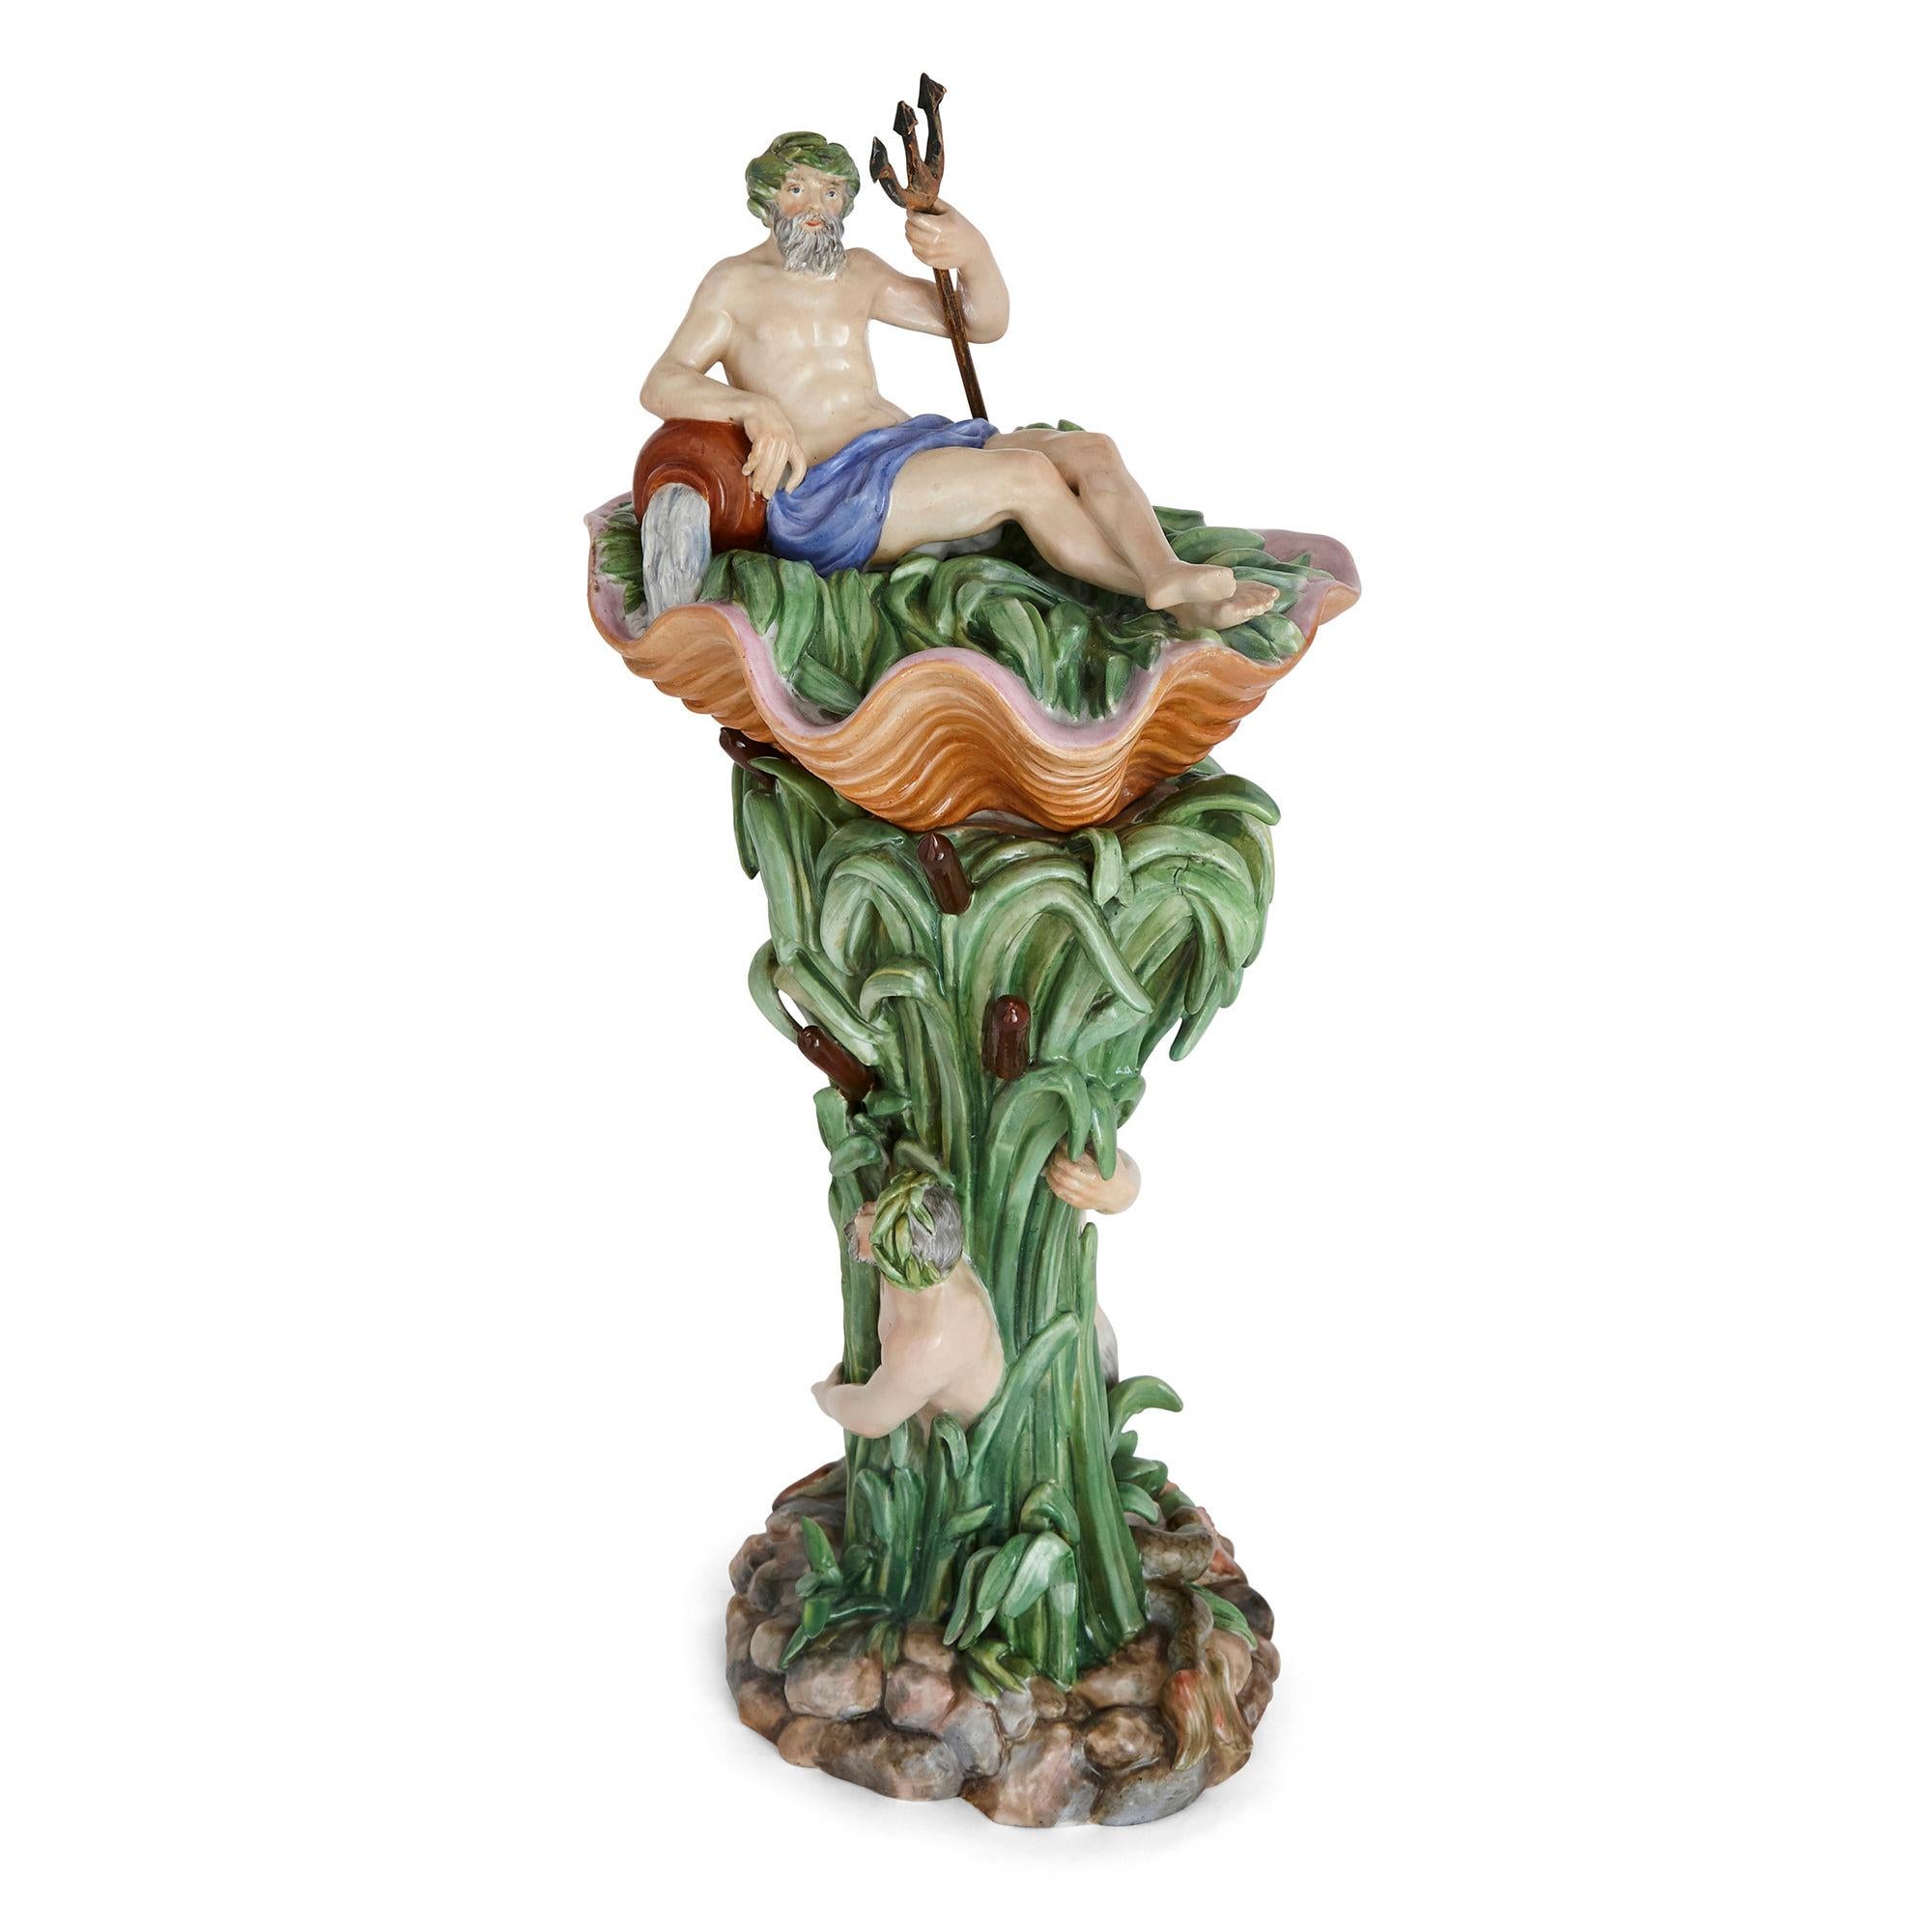 Antique Danish Rococo style porcelain centrepiece by Royal Copenhagen
Danish, mid 19th century
Dimensions: Height 44cm, width 19cm, depth 17cm

This vibrant porcelain centrepiece is modelled with the top as a coral coloured shell, within which a